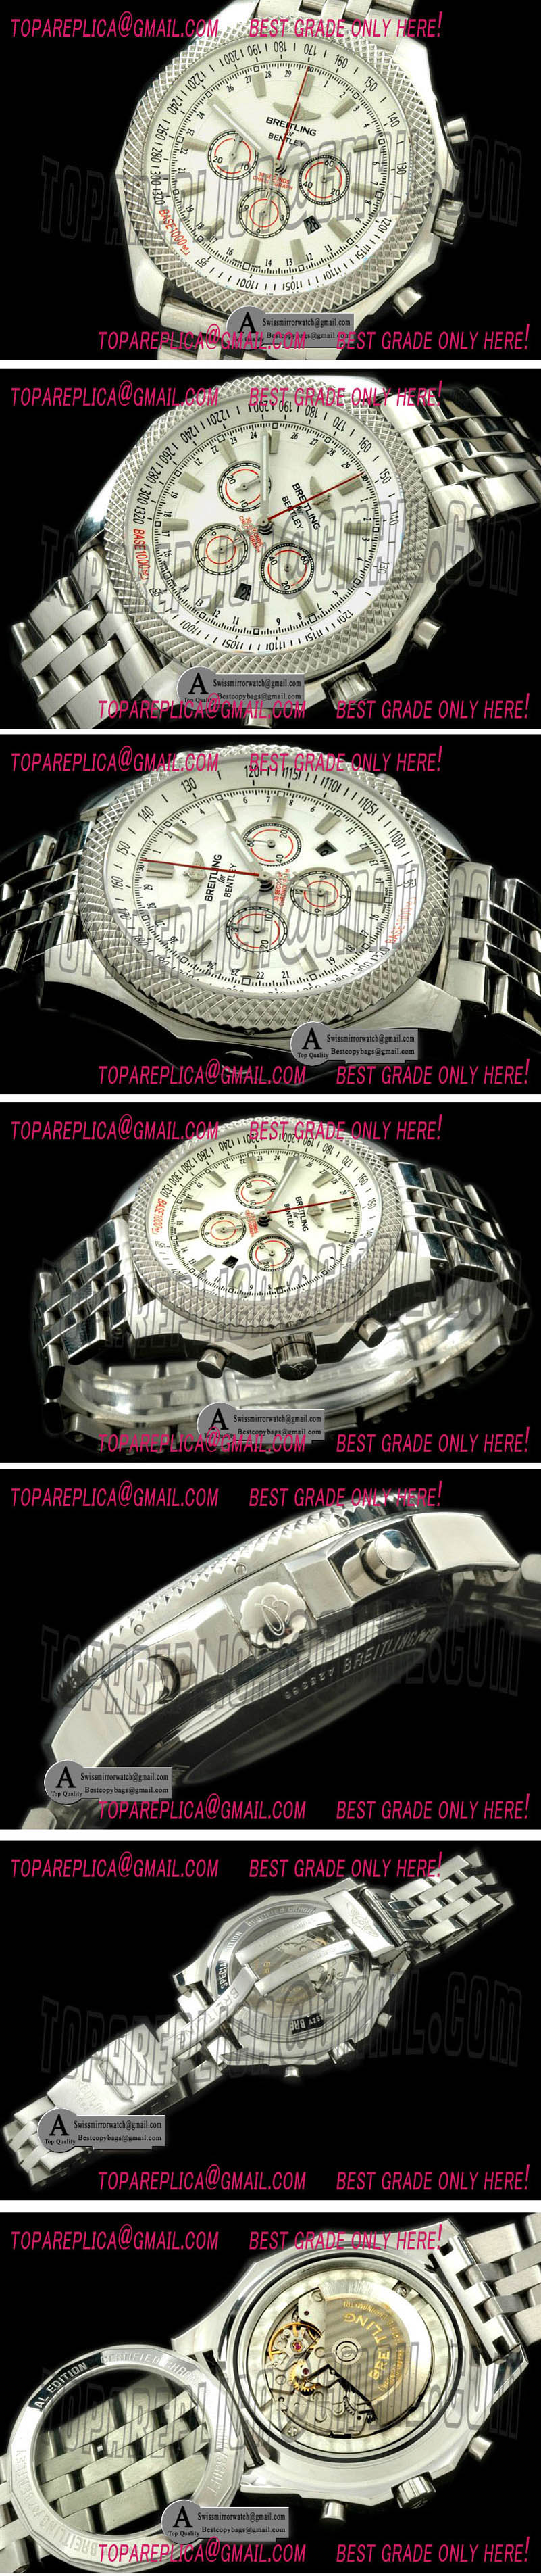 Breitling Bentley Motors Barnato Racing Chronograph A2536821/G734 SS/SS White A-7750 Sec@3 Replica Watches